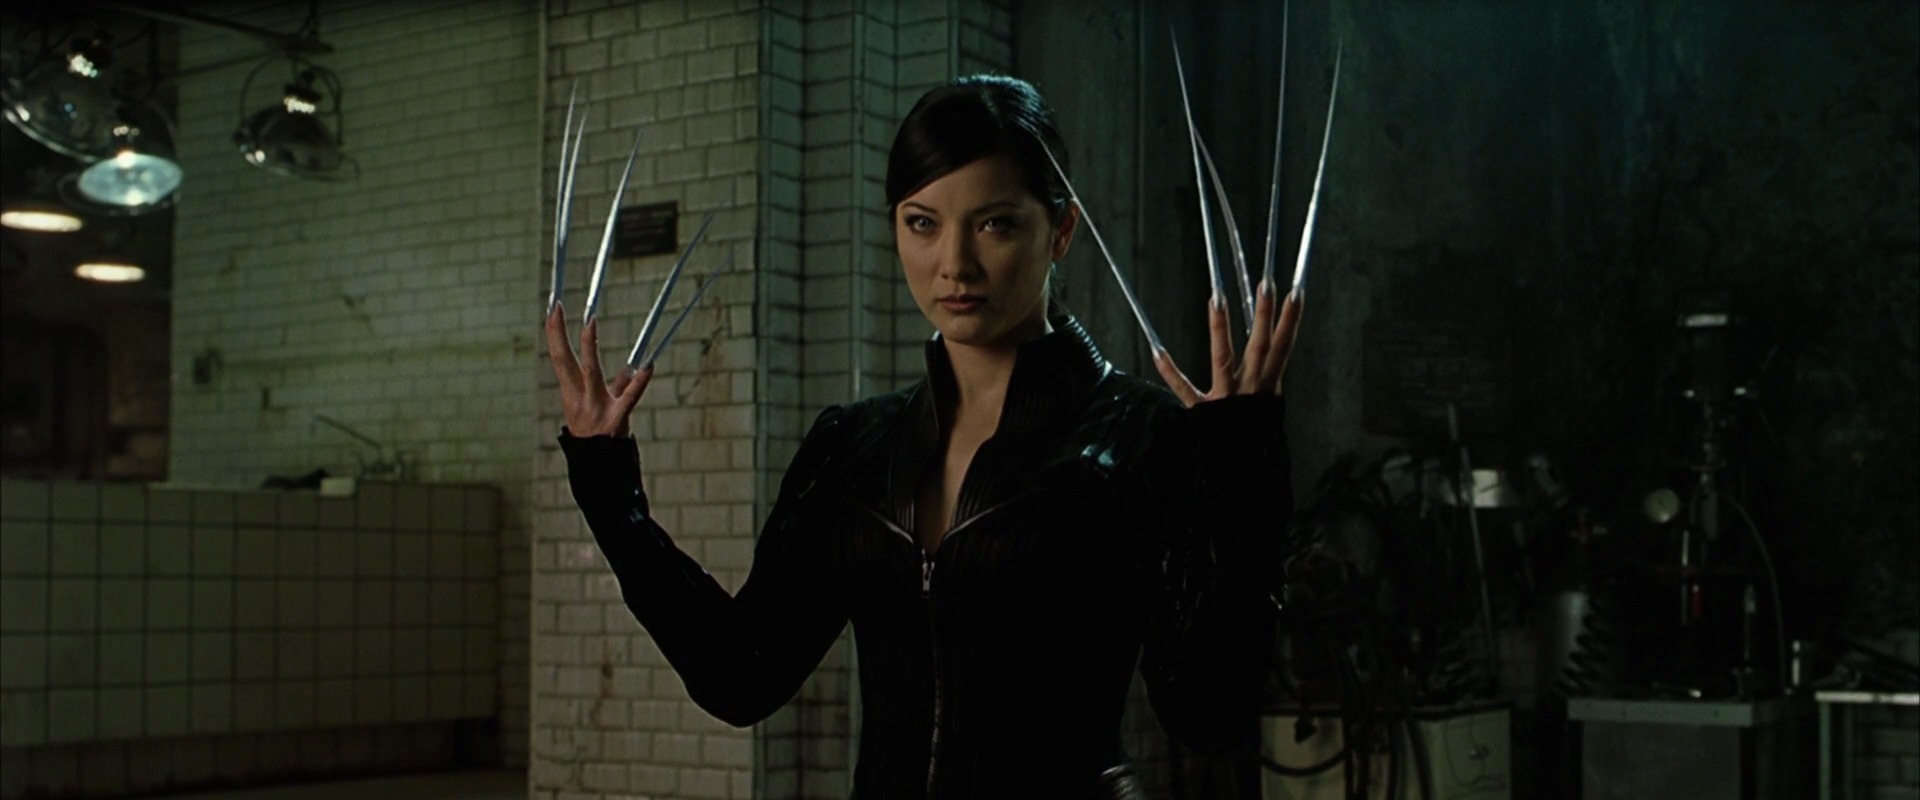 Download deathstrike image for free